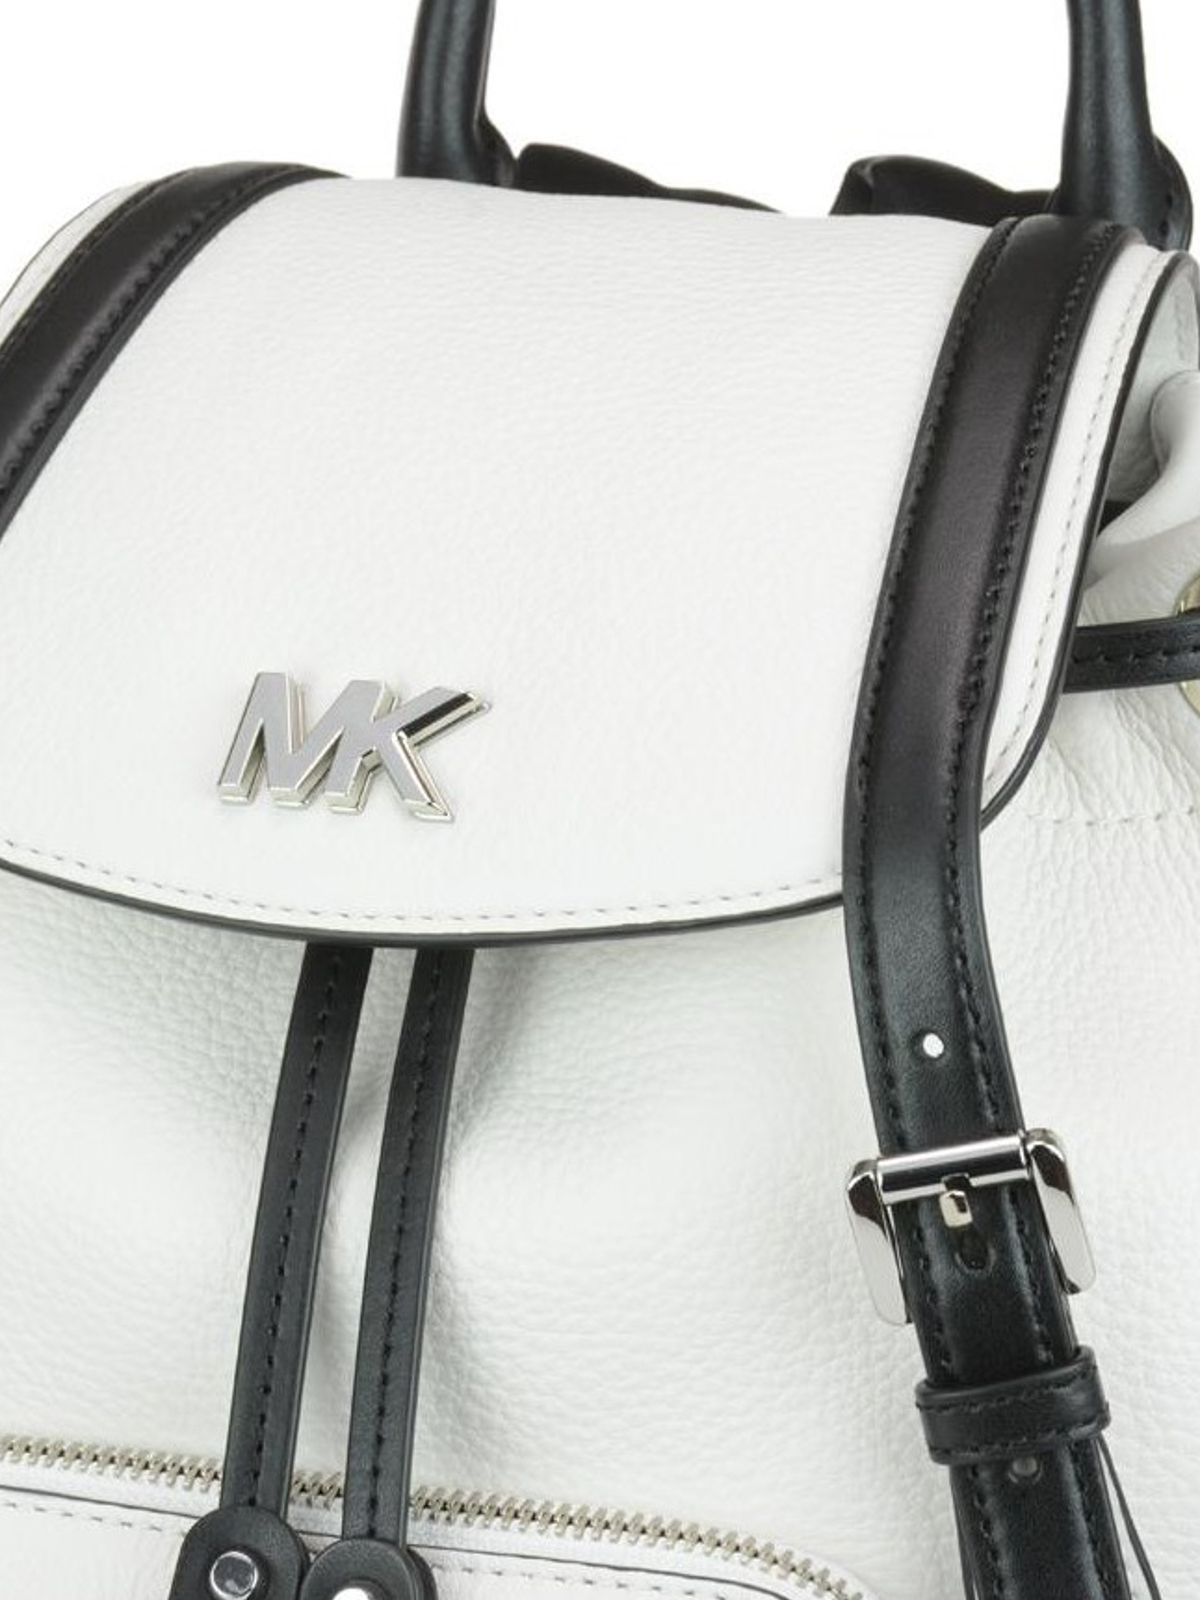 Michael Kors, Bags, Michael Kors Black And White Leather Small Backpack